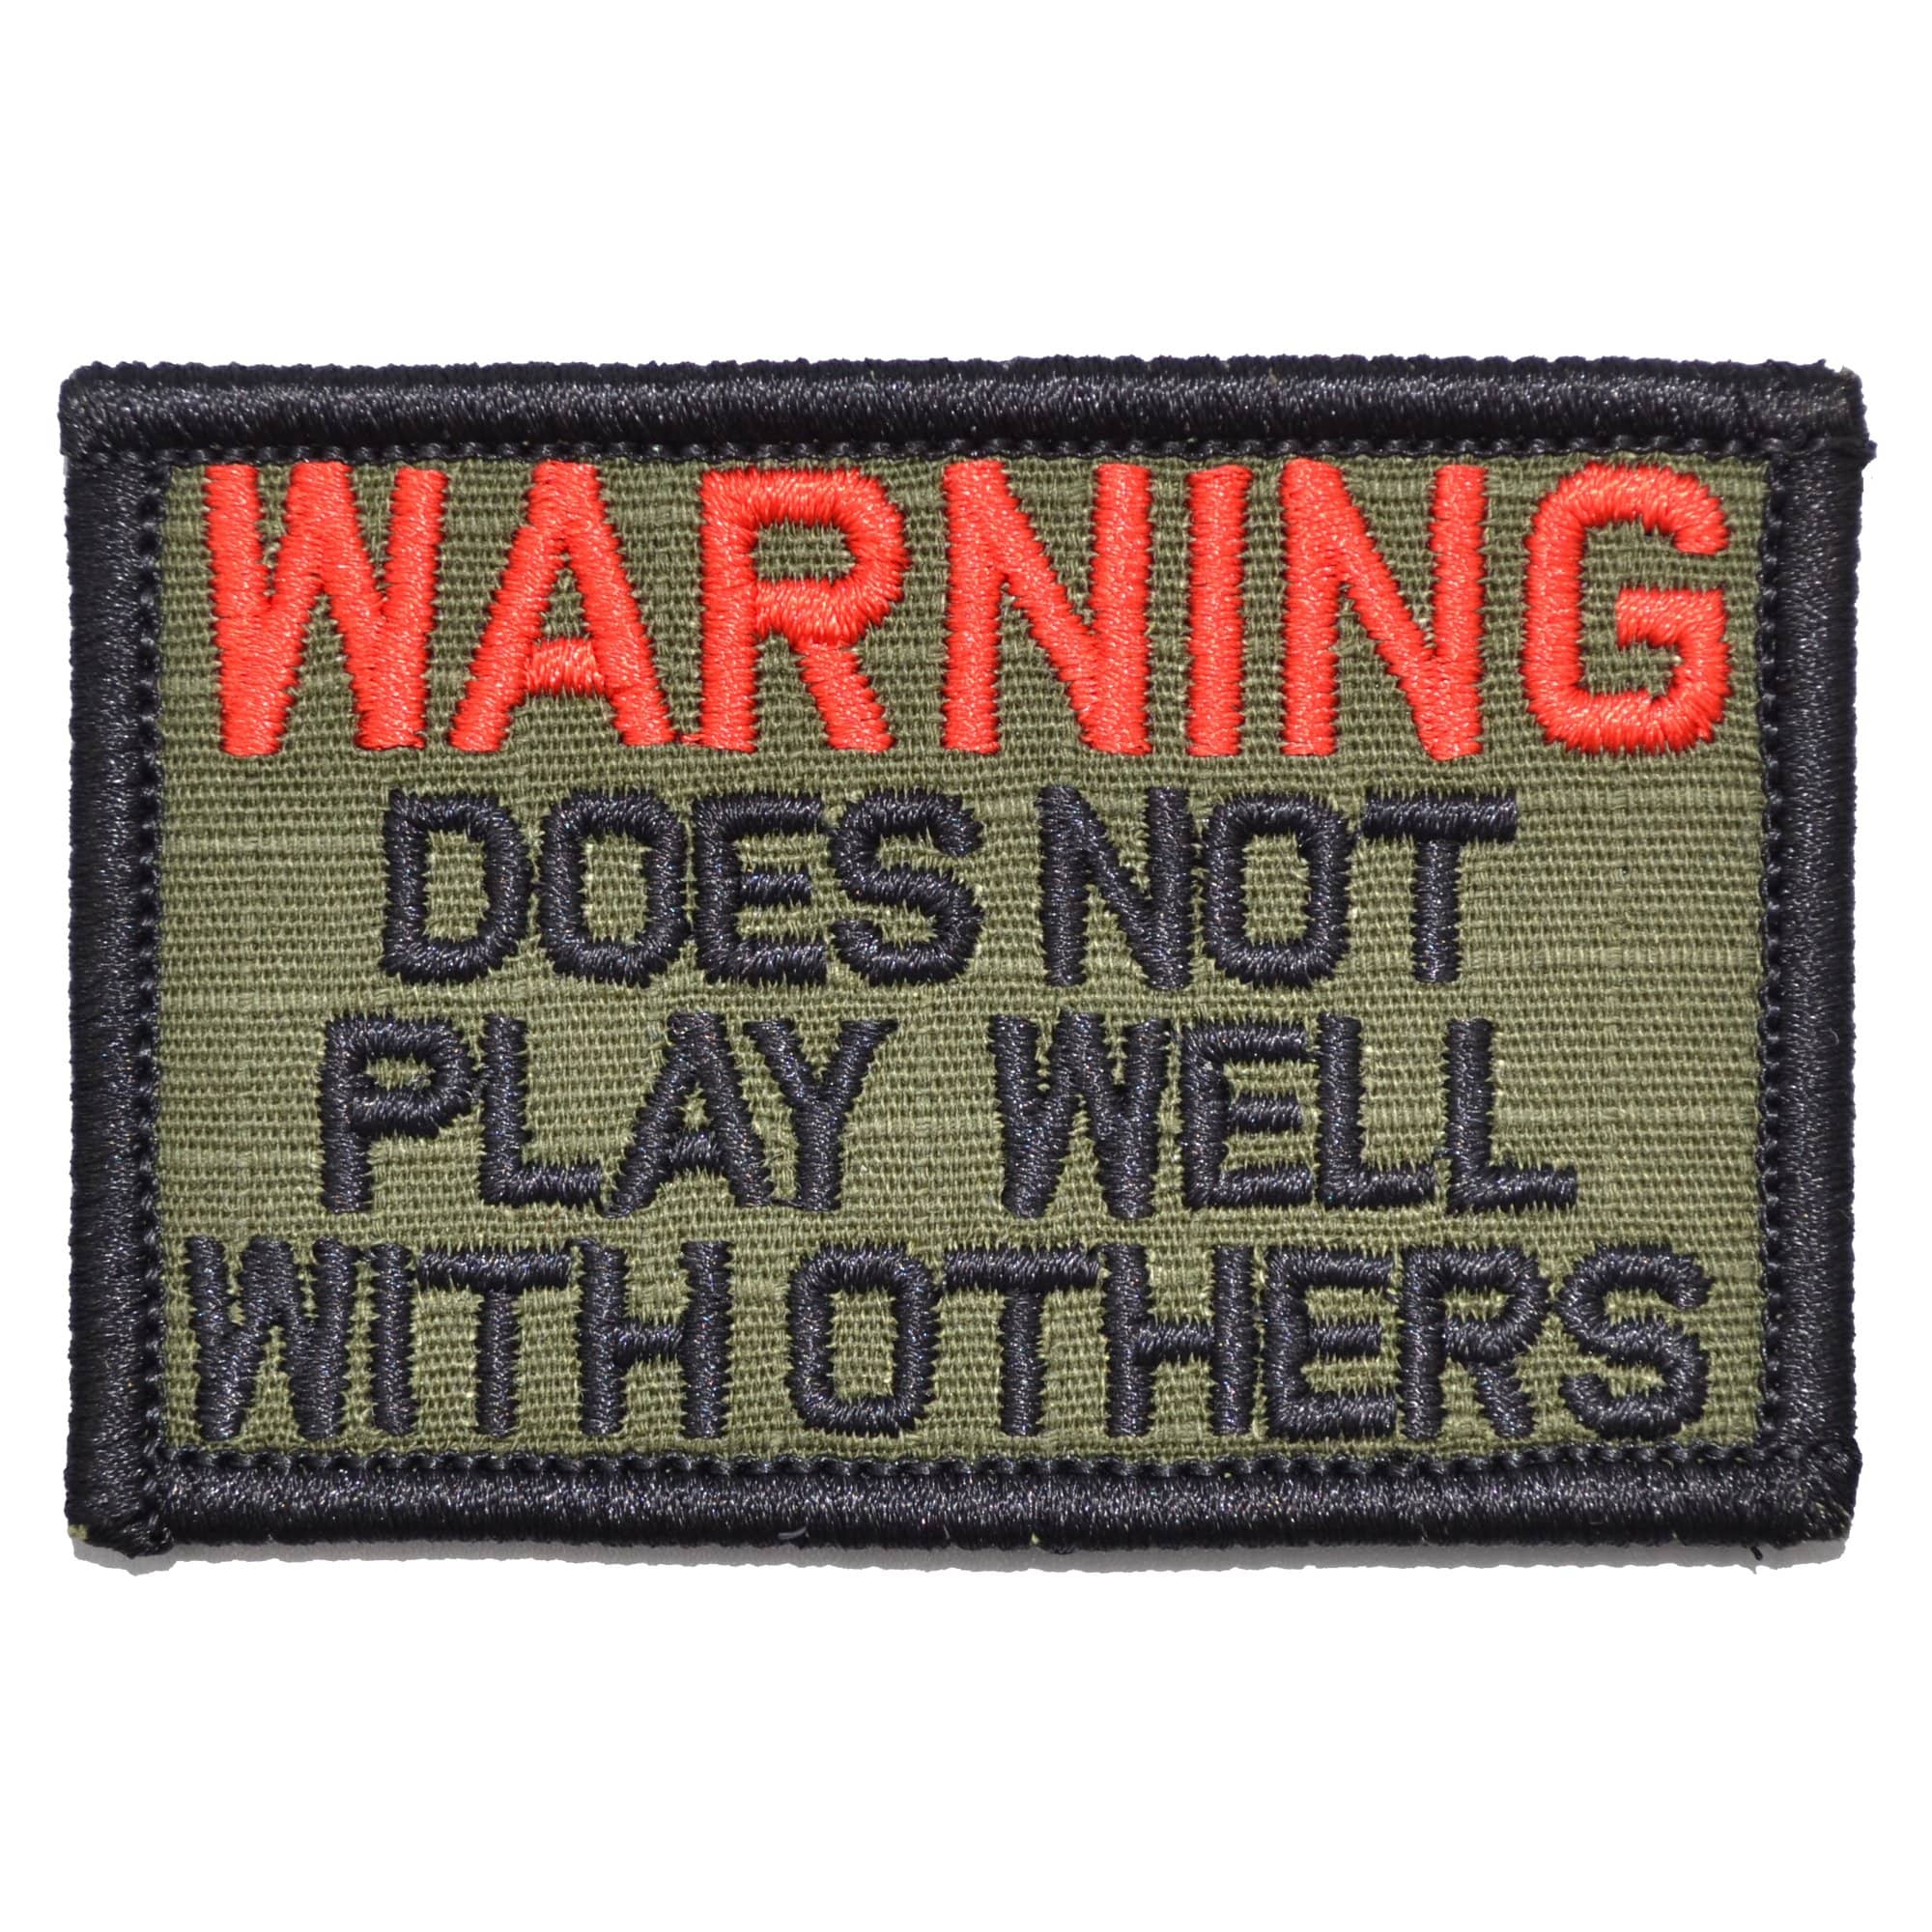 Tactical Gear Junkie Patches Olive Drab WARNING: Does Not Play Well With Others - 2x3 Patch